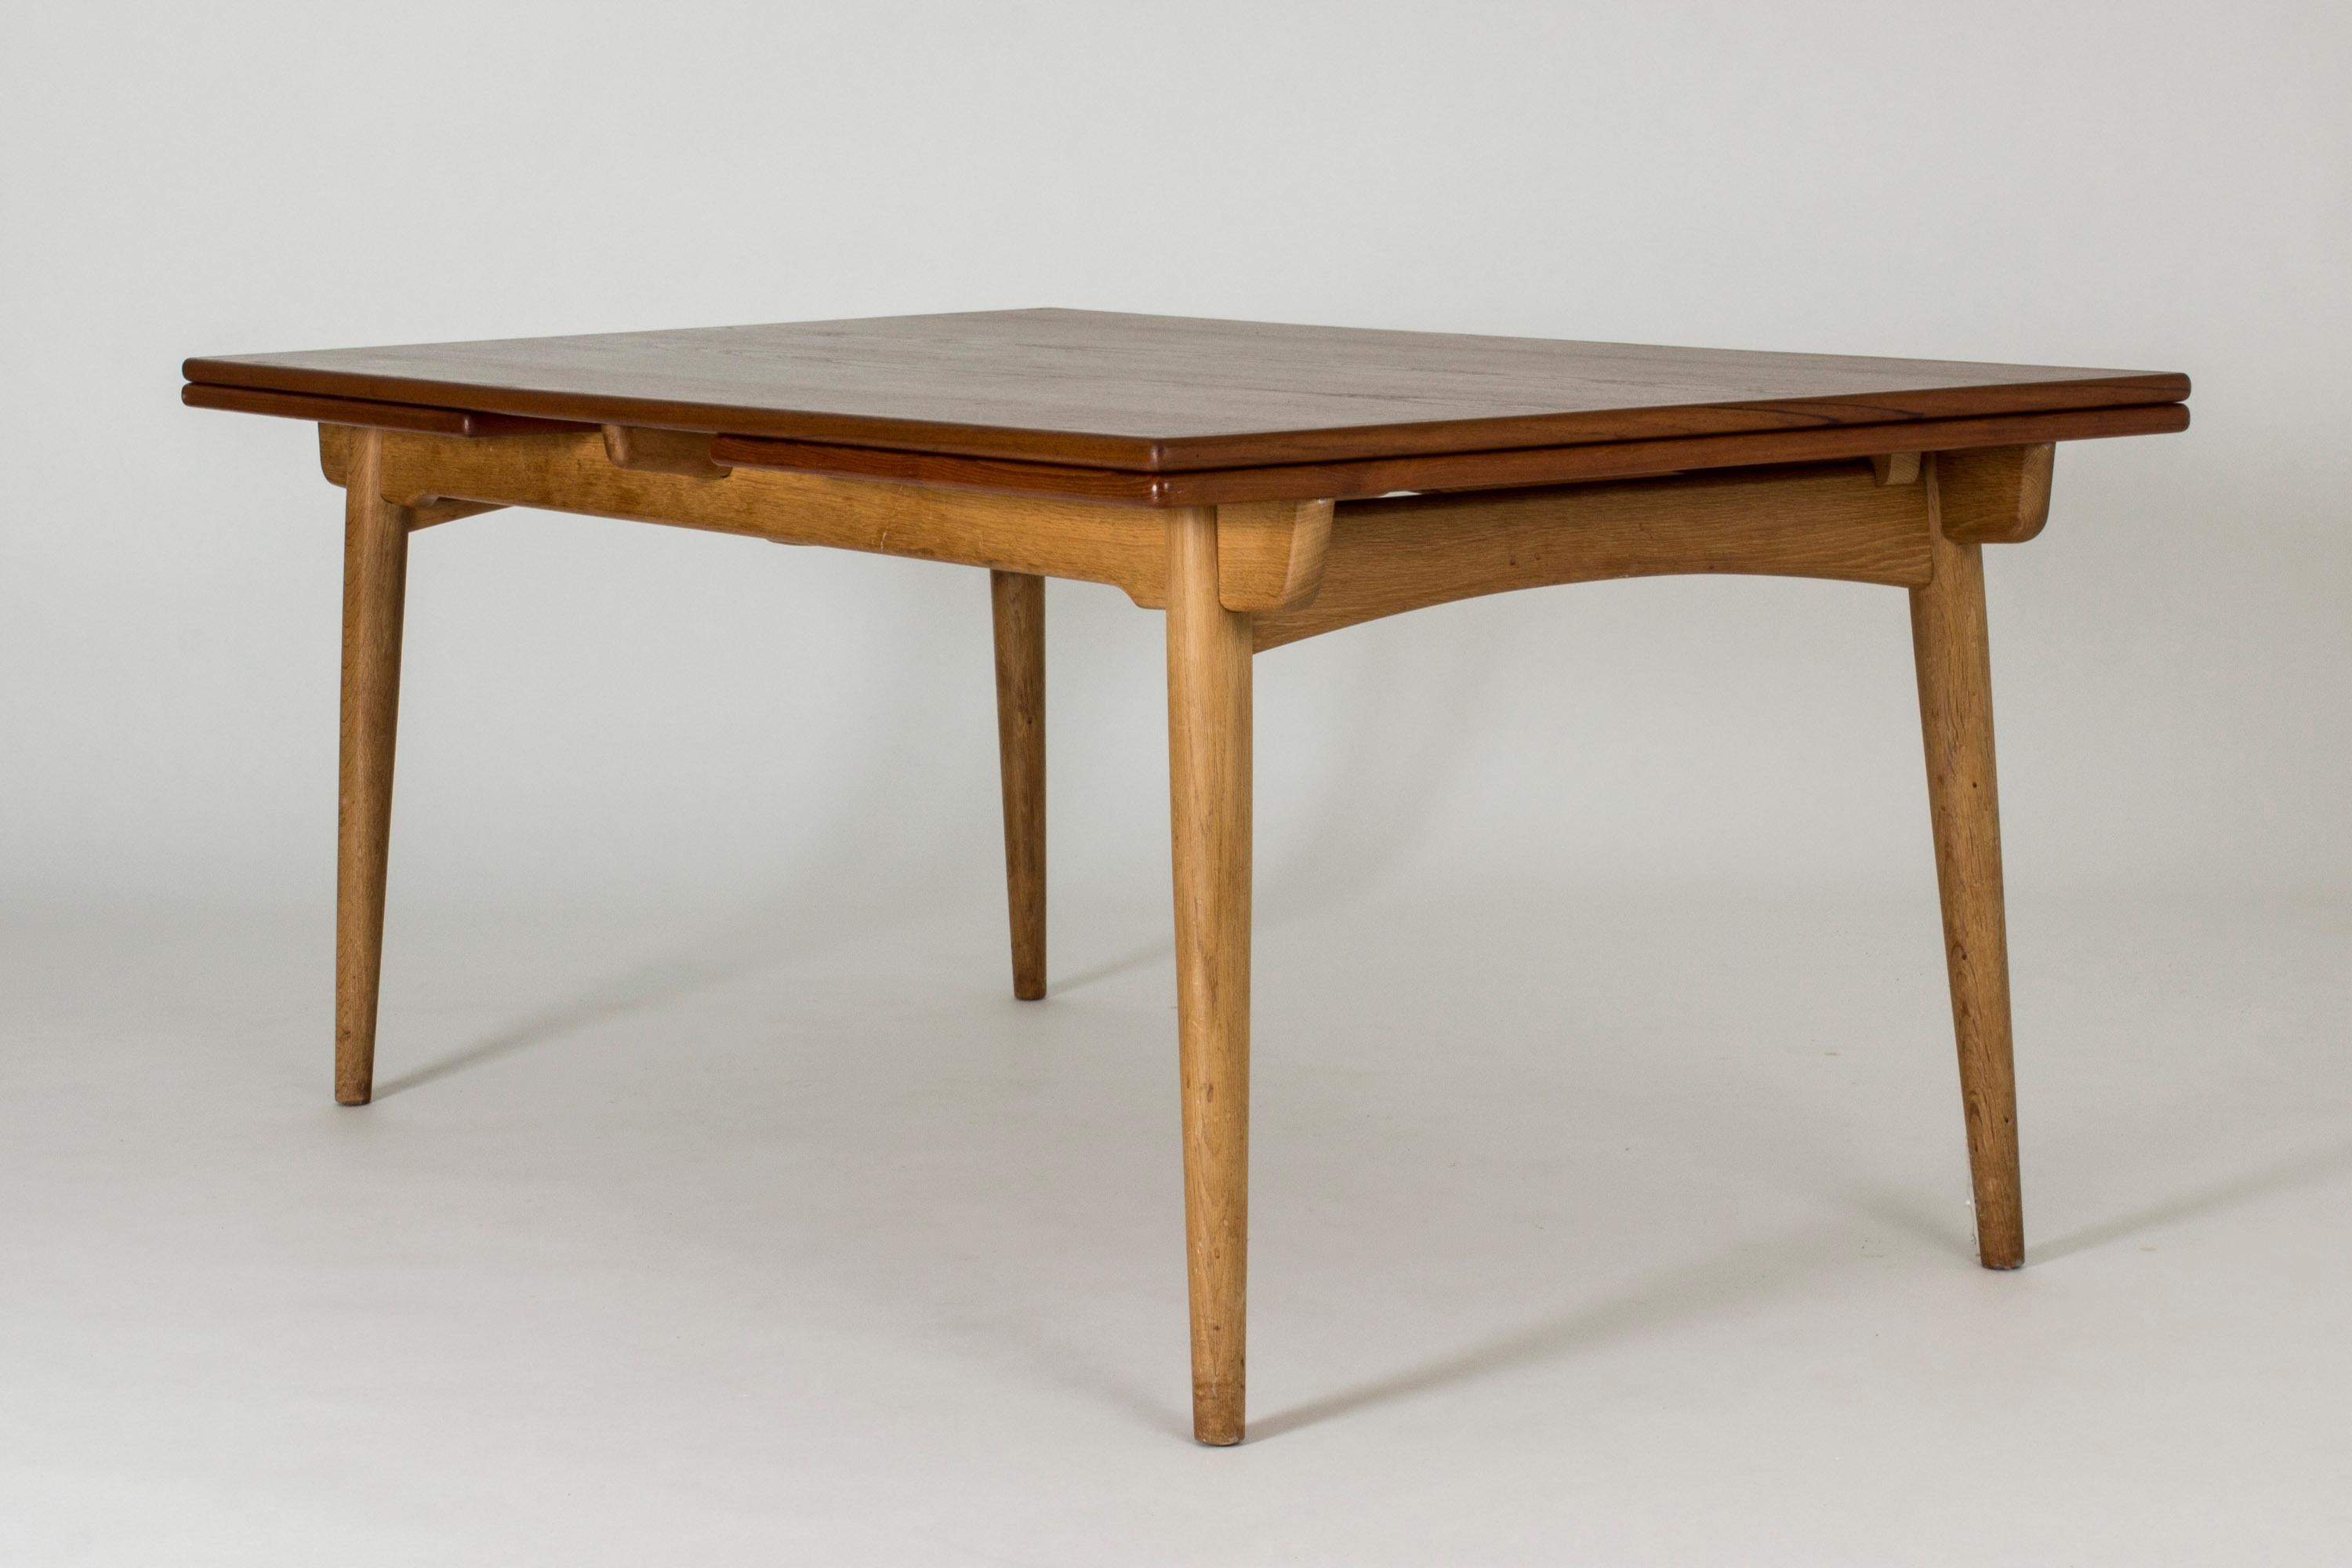 Large and versatile dining table by Hans J. Wegner, with teak top and oak legs. Two extra leaves measuring 60 cm each are cleverly hidden inside the table and are easily extended. The table looks great both with and without the extra leaves.